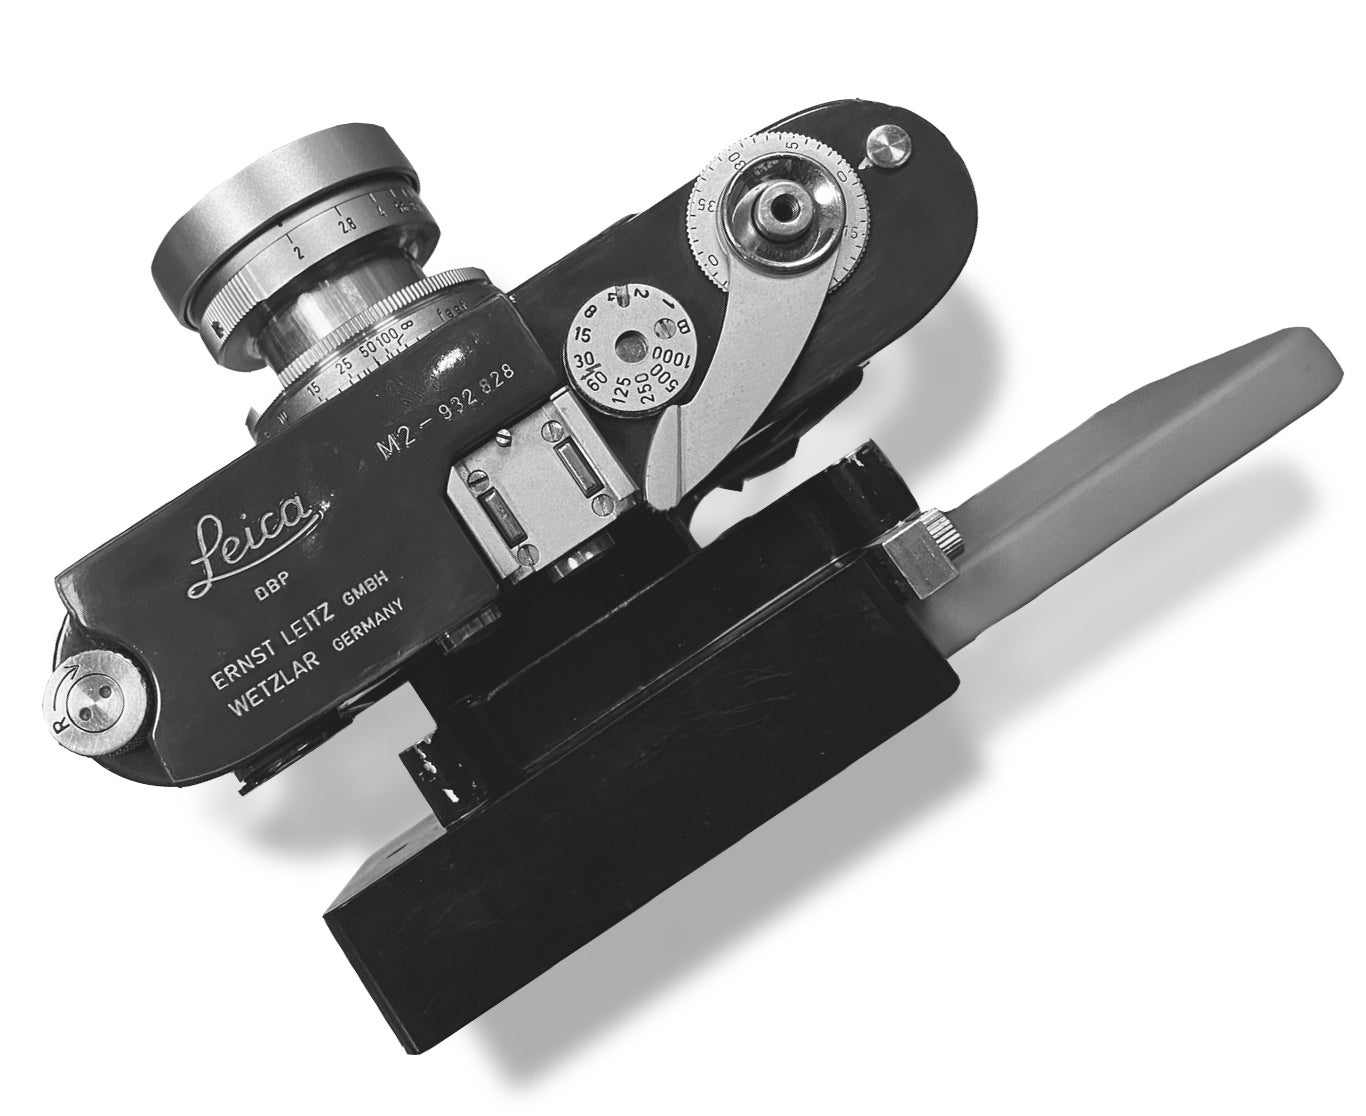 The Digi Swap is a new device that attaches to most 35mm film cameras.